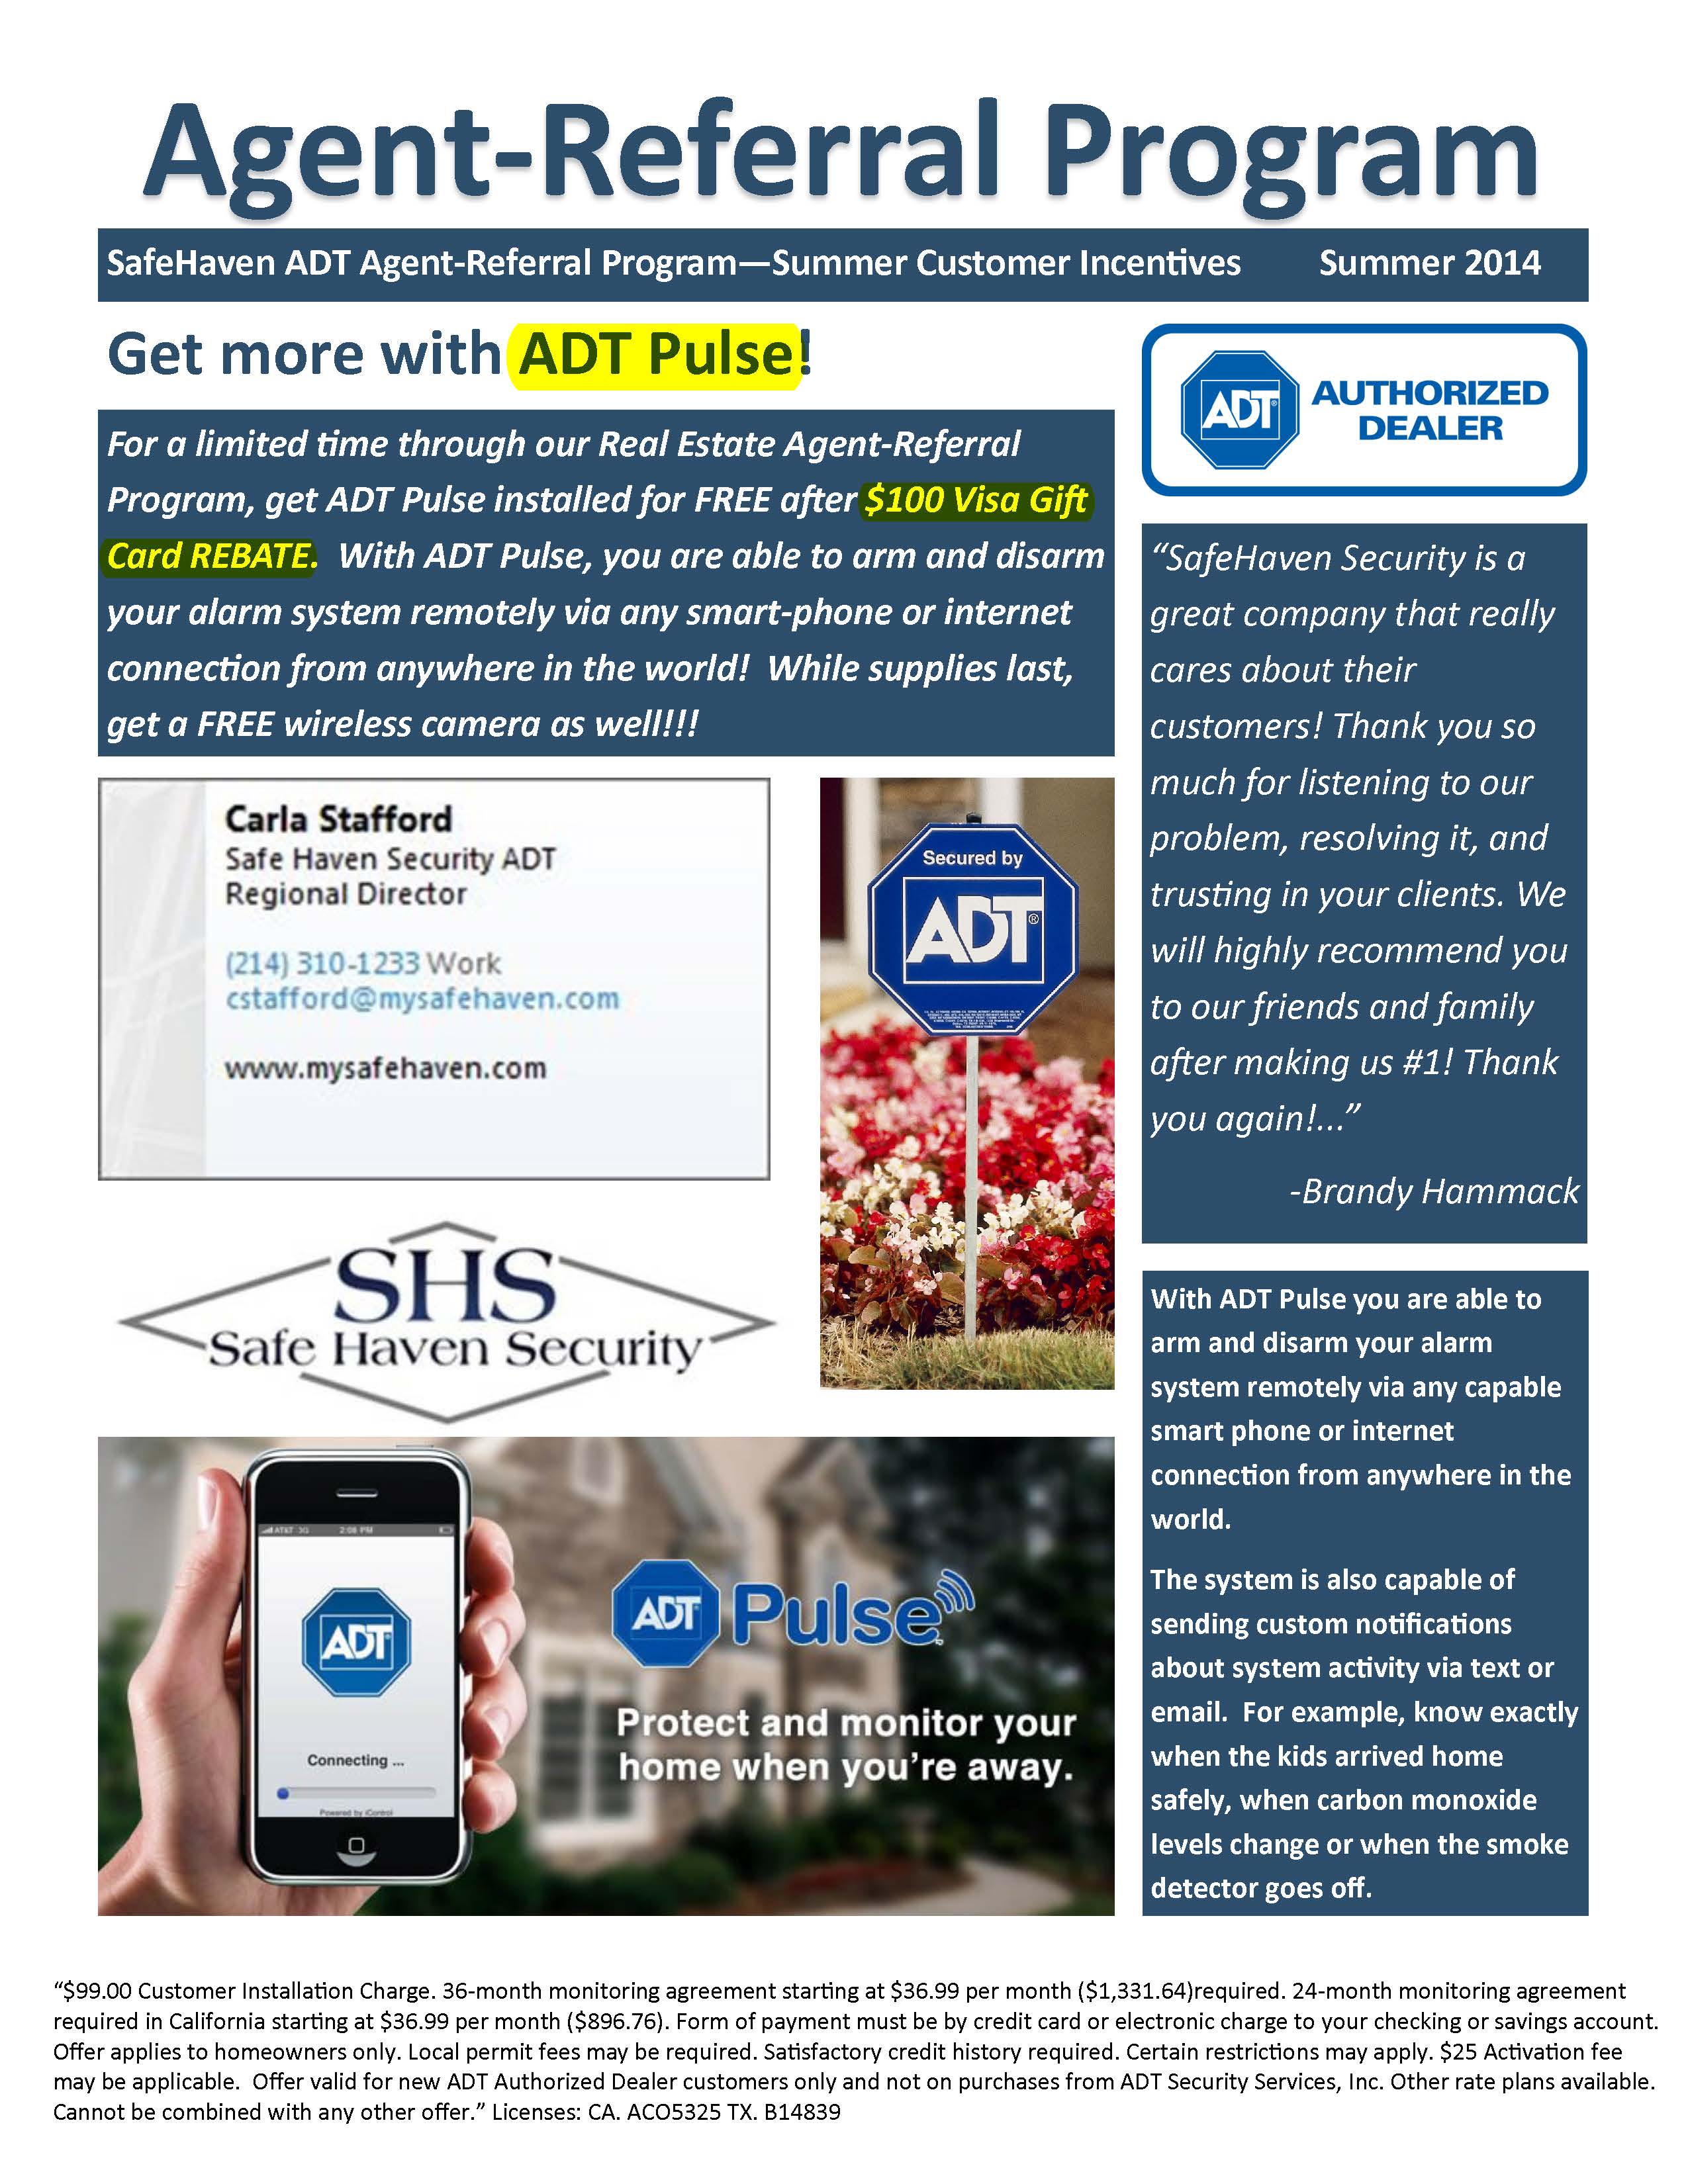 If You Do Once Get Your New System Going Or Transfer Existing One Adt Will Mail A 100 Visa Gift Card